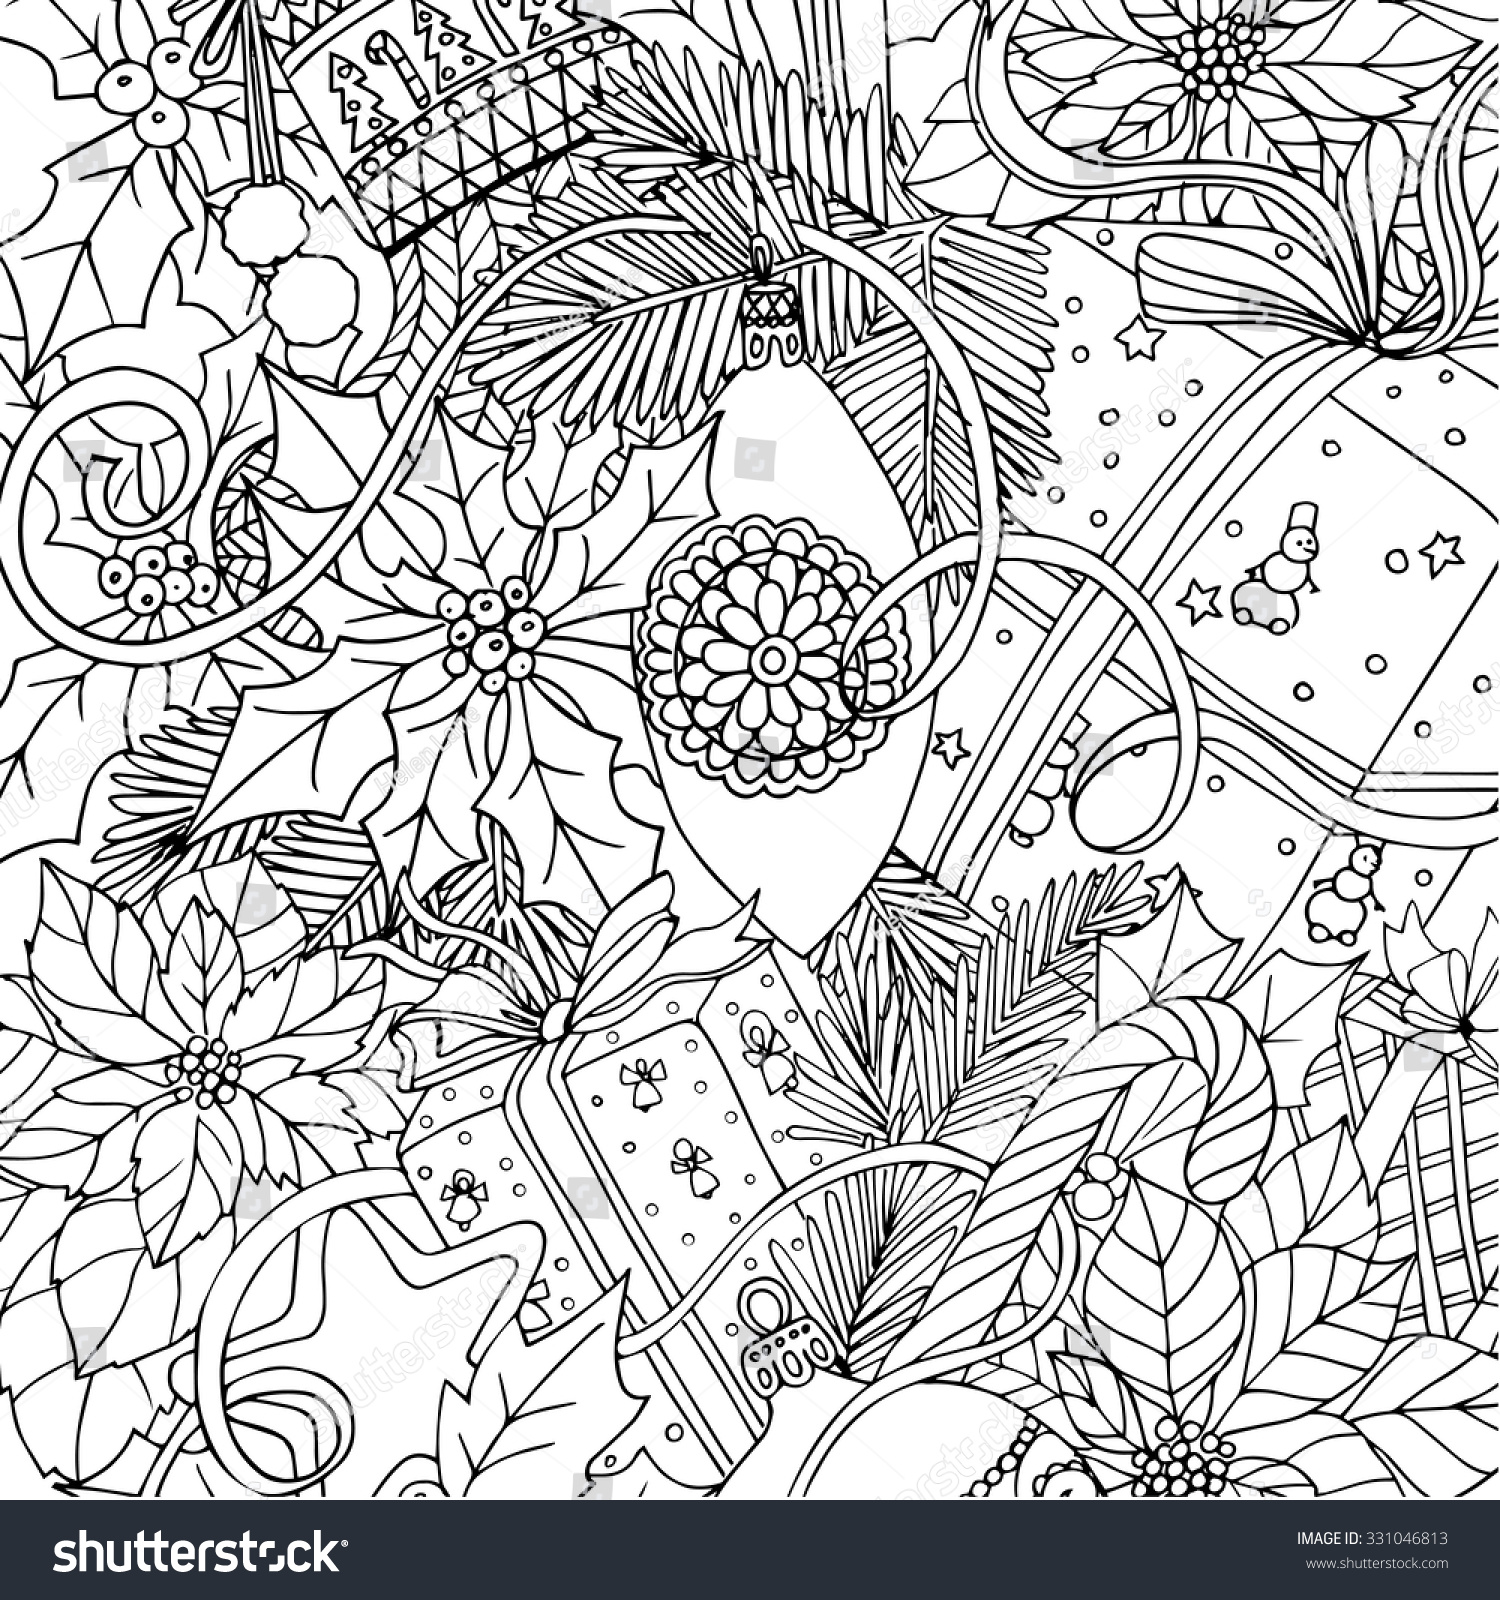 Coloring Book For Adult And Older Children. Coloring Page ...